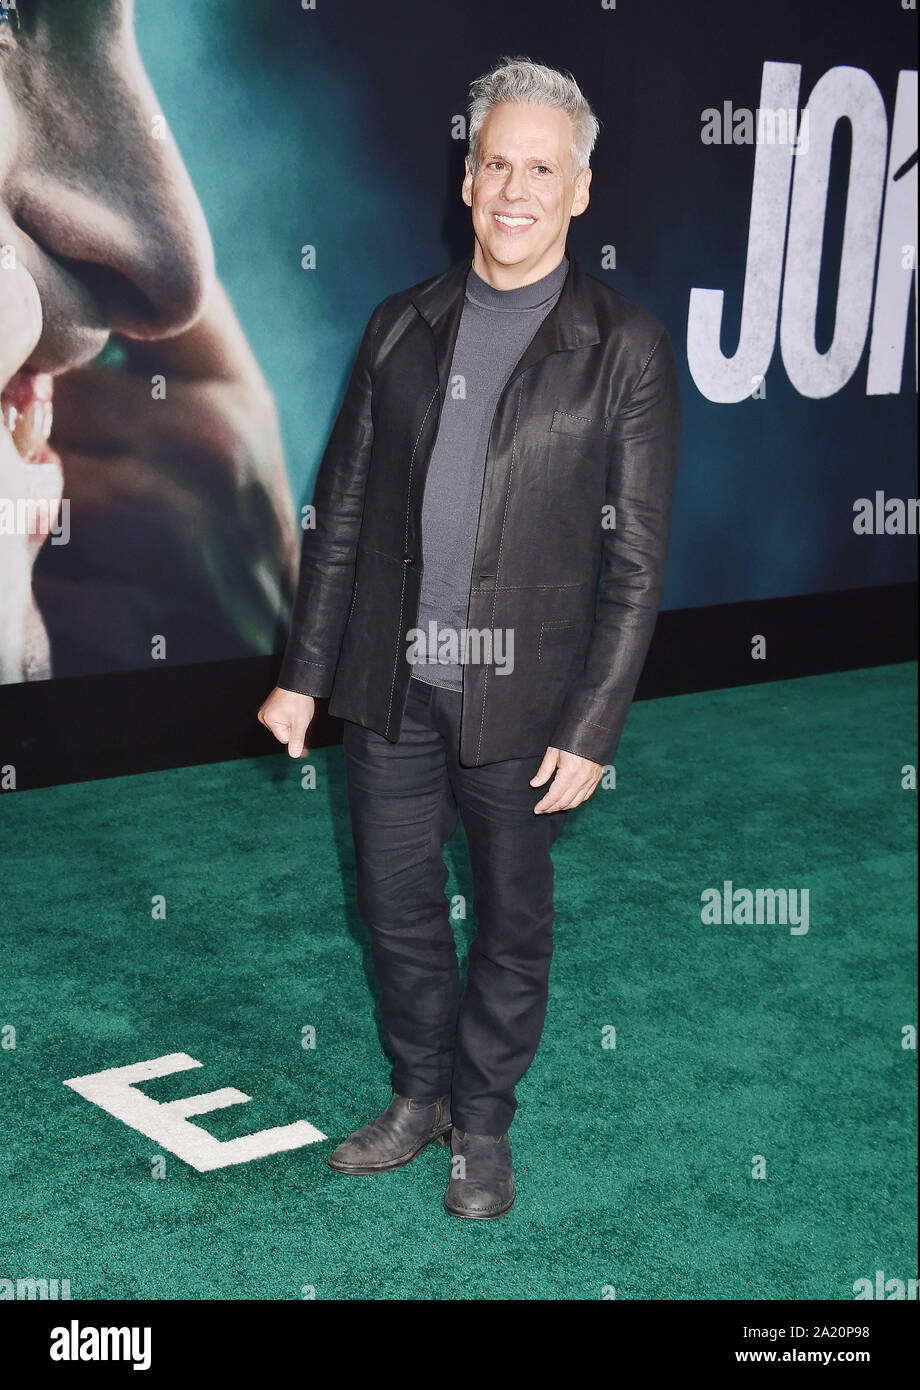 HOLLYWOOD, CA - SEPTEMBER 28: Josh Pais attends for the premiere of Warner Bros Pictures 'Joker' held at TCL Chinese Theatre IMAX on September 28, 2019 in Hollywood, California. Stock Photo